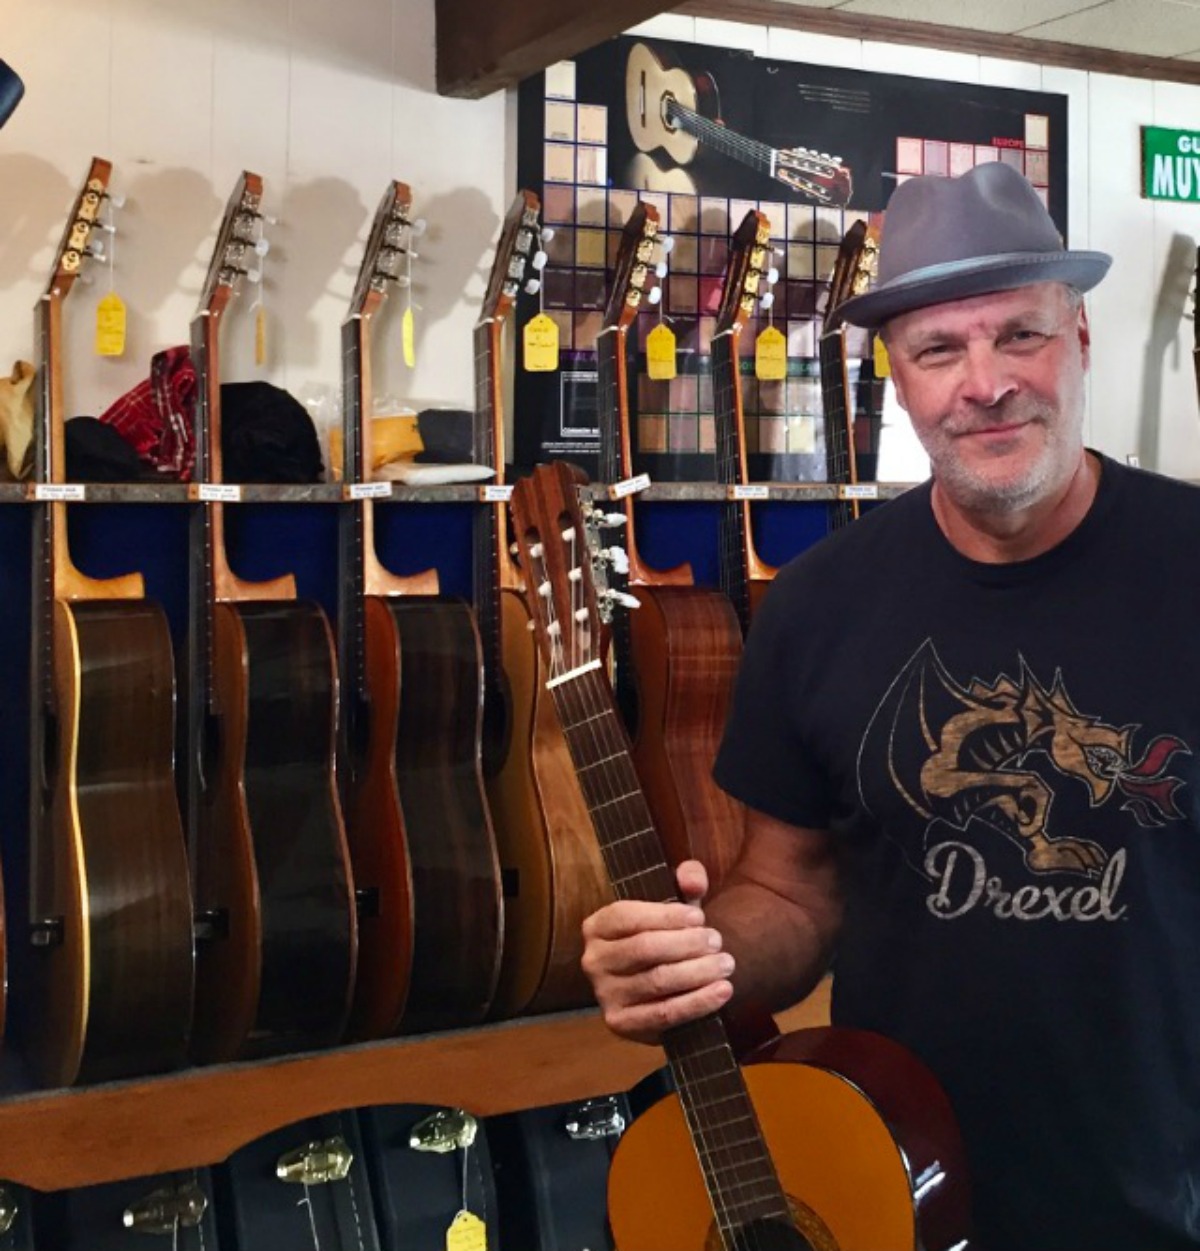 Besides Drexel University, Eric likes to &quot;hang out&quot; at the Philadelphia Classical Guitar Store at 2038 Sansom St.